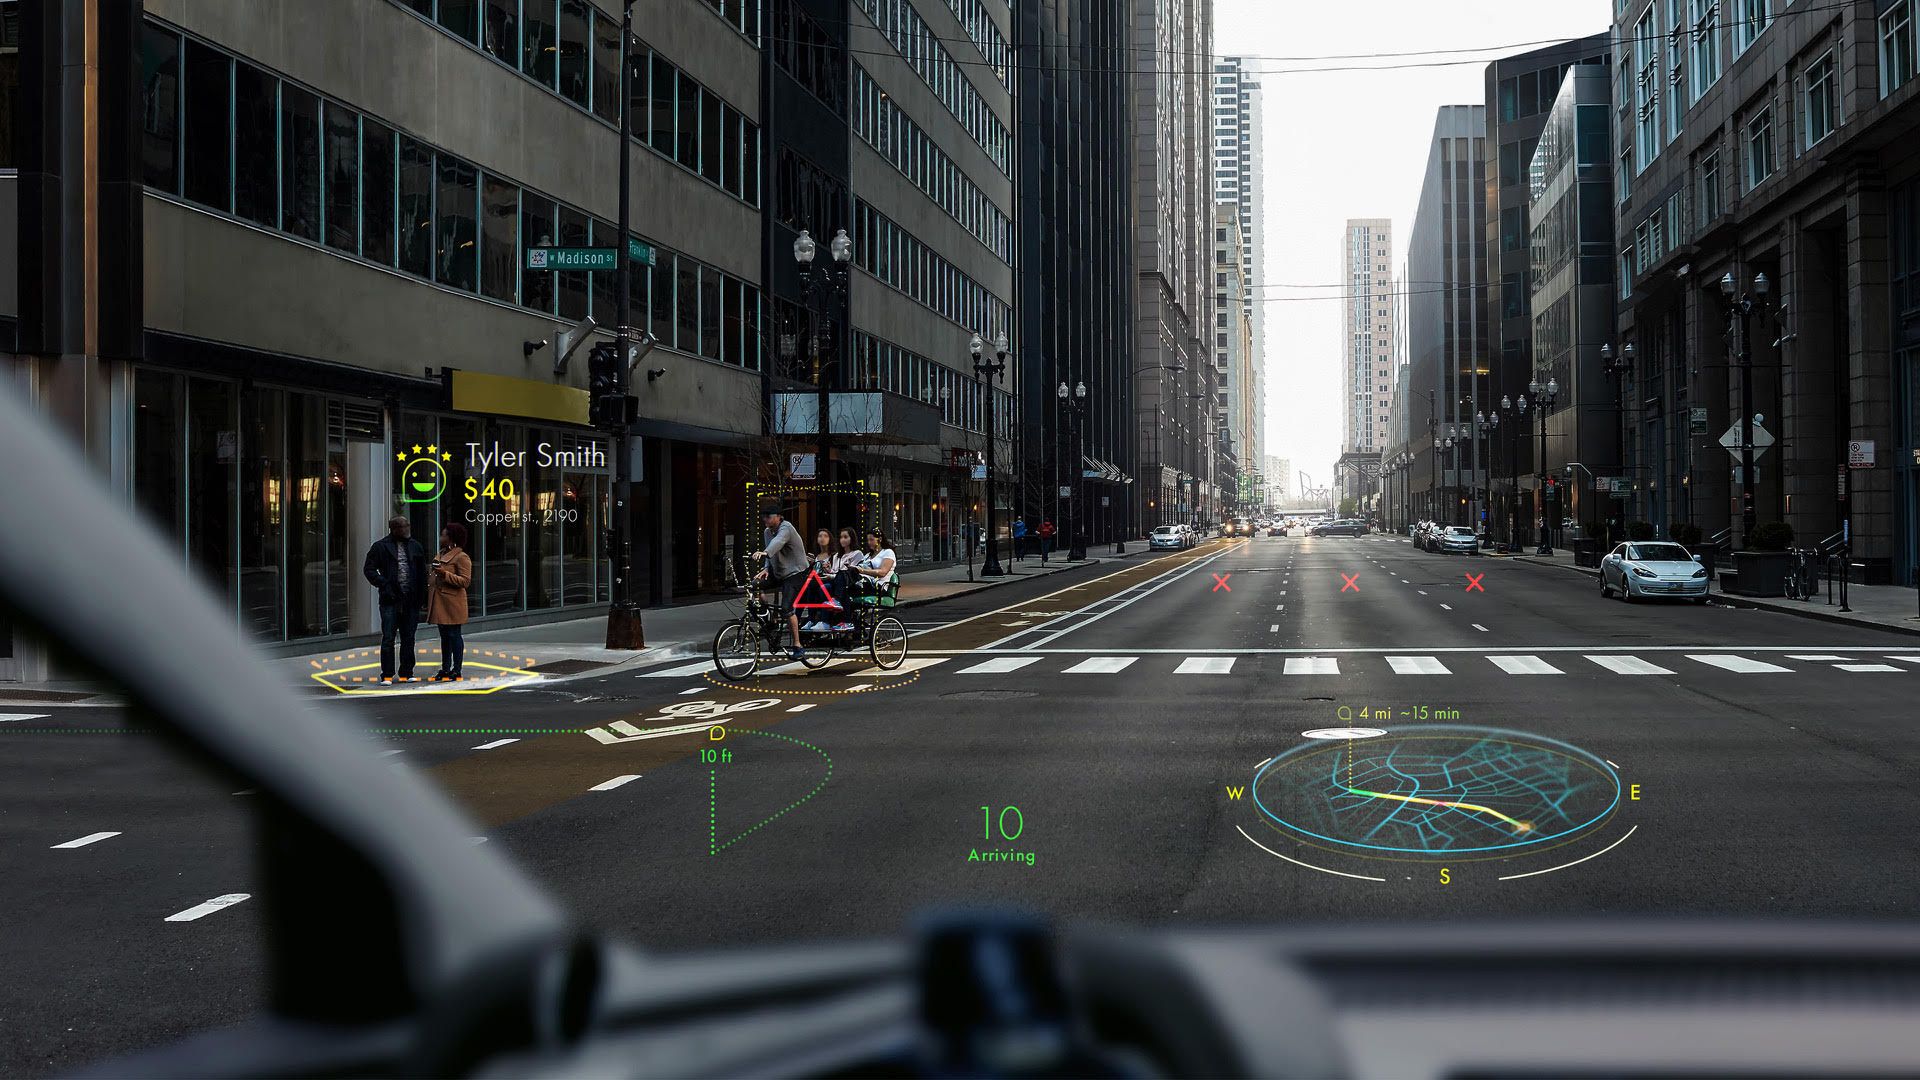 HUD Augmented Reality TechCrunch